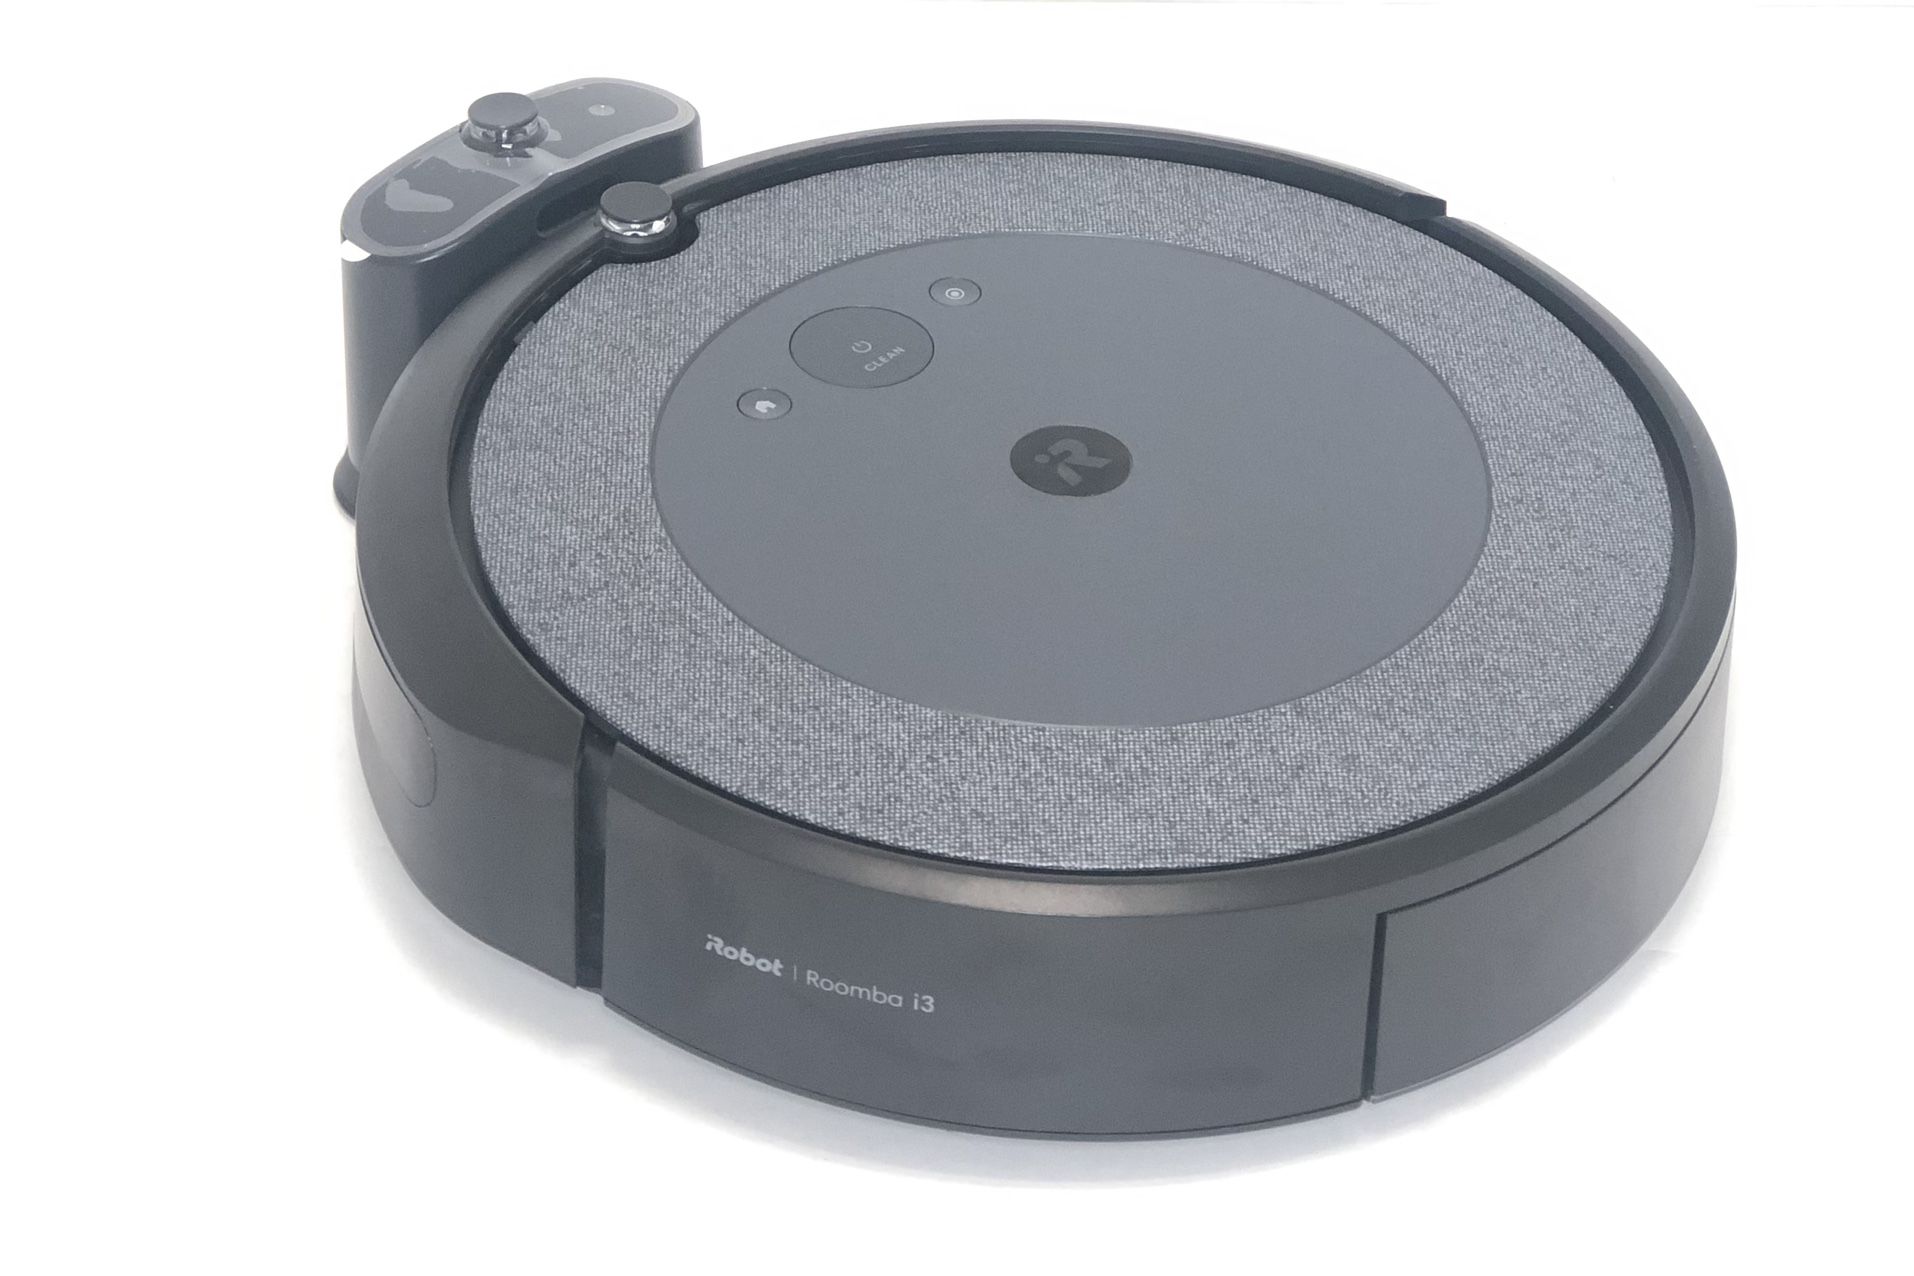 iRobot Roomba i3 (3150) Wi-Fi Connected Robot Vacuum Vacuum - Wi-Fi Connected Mapping, Works with Alexa